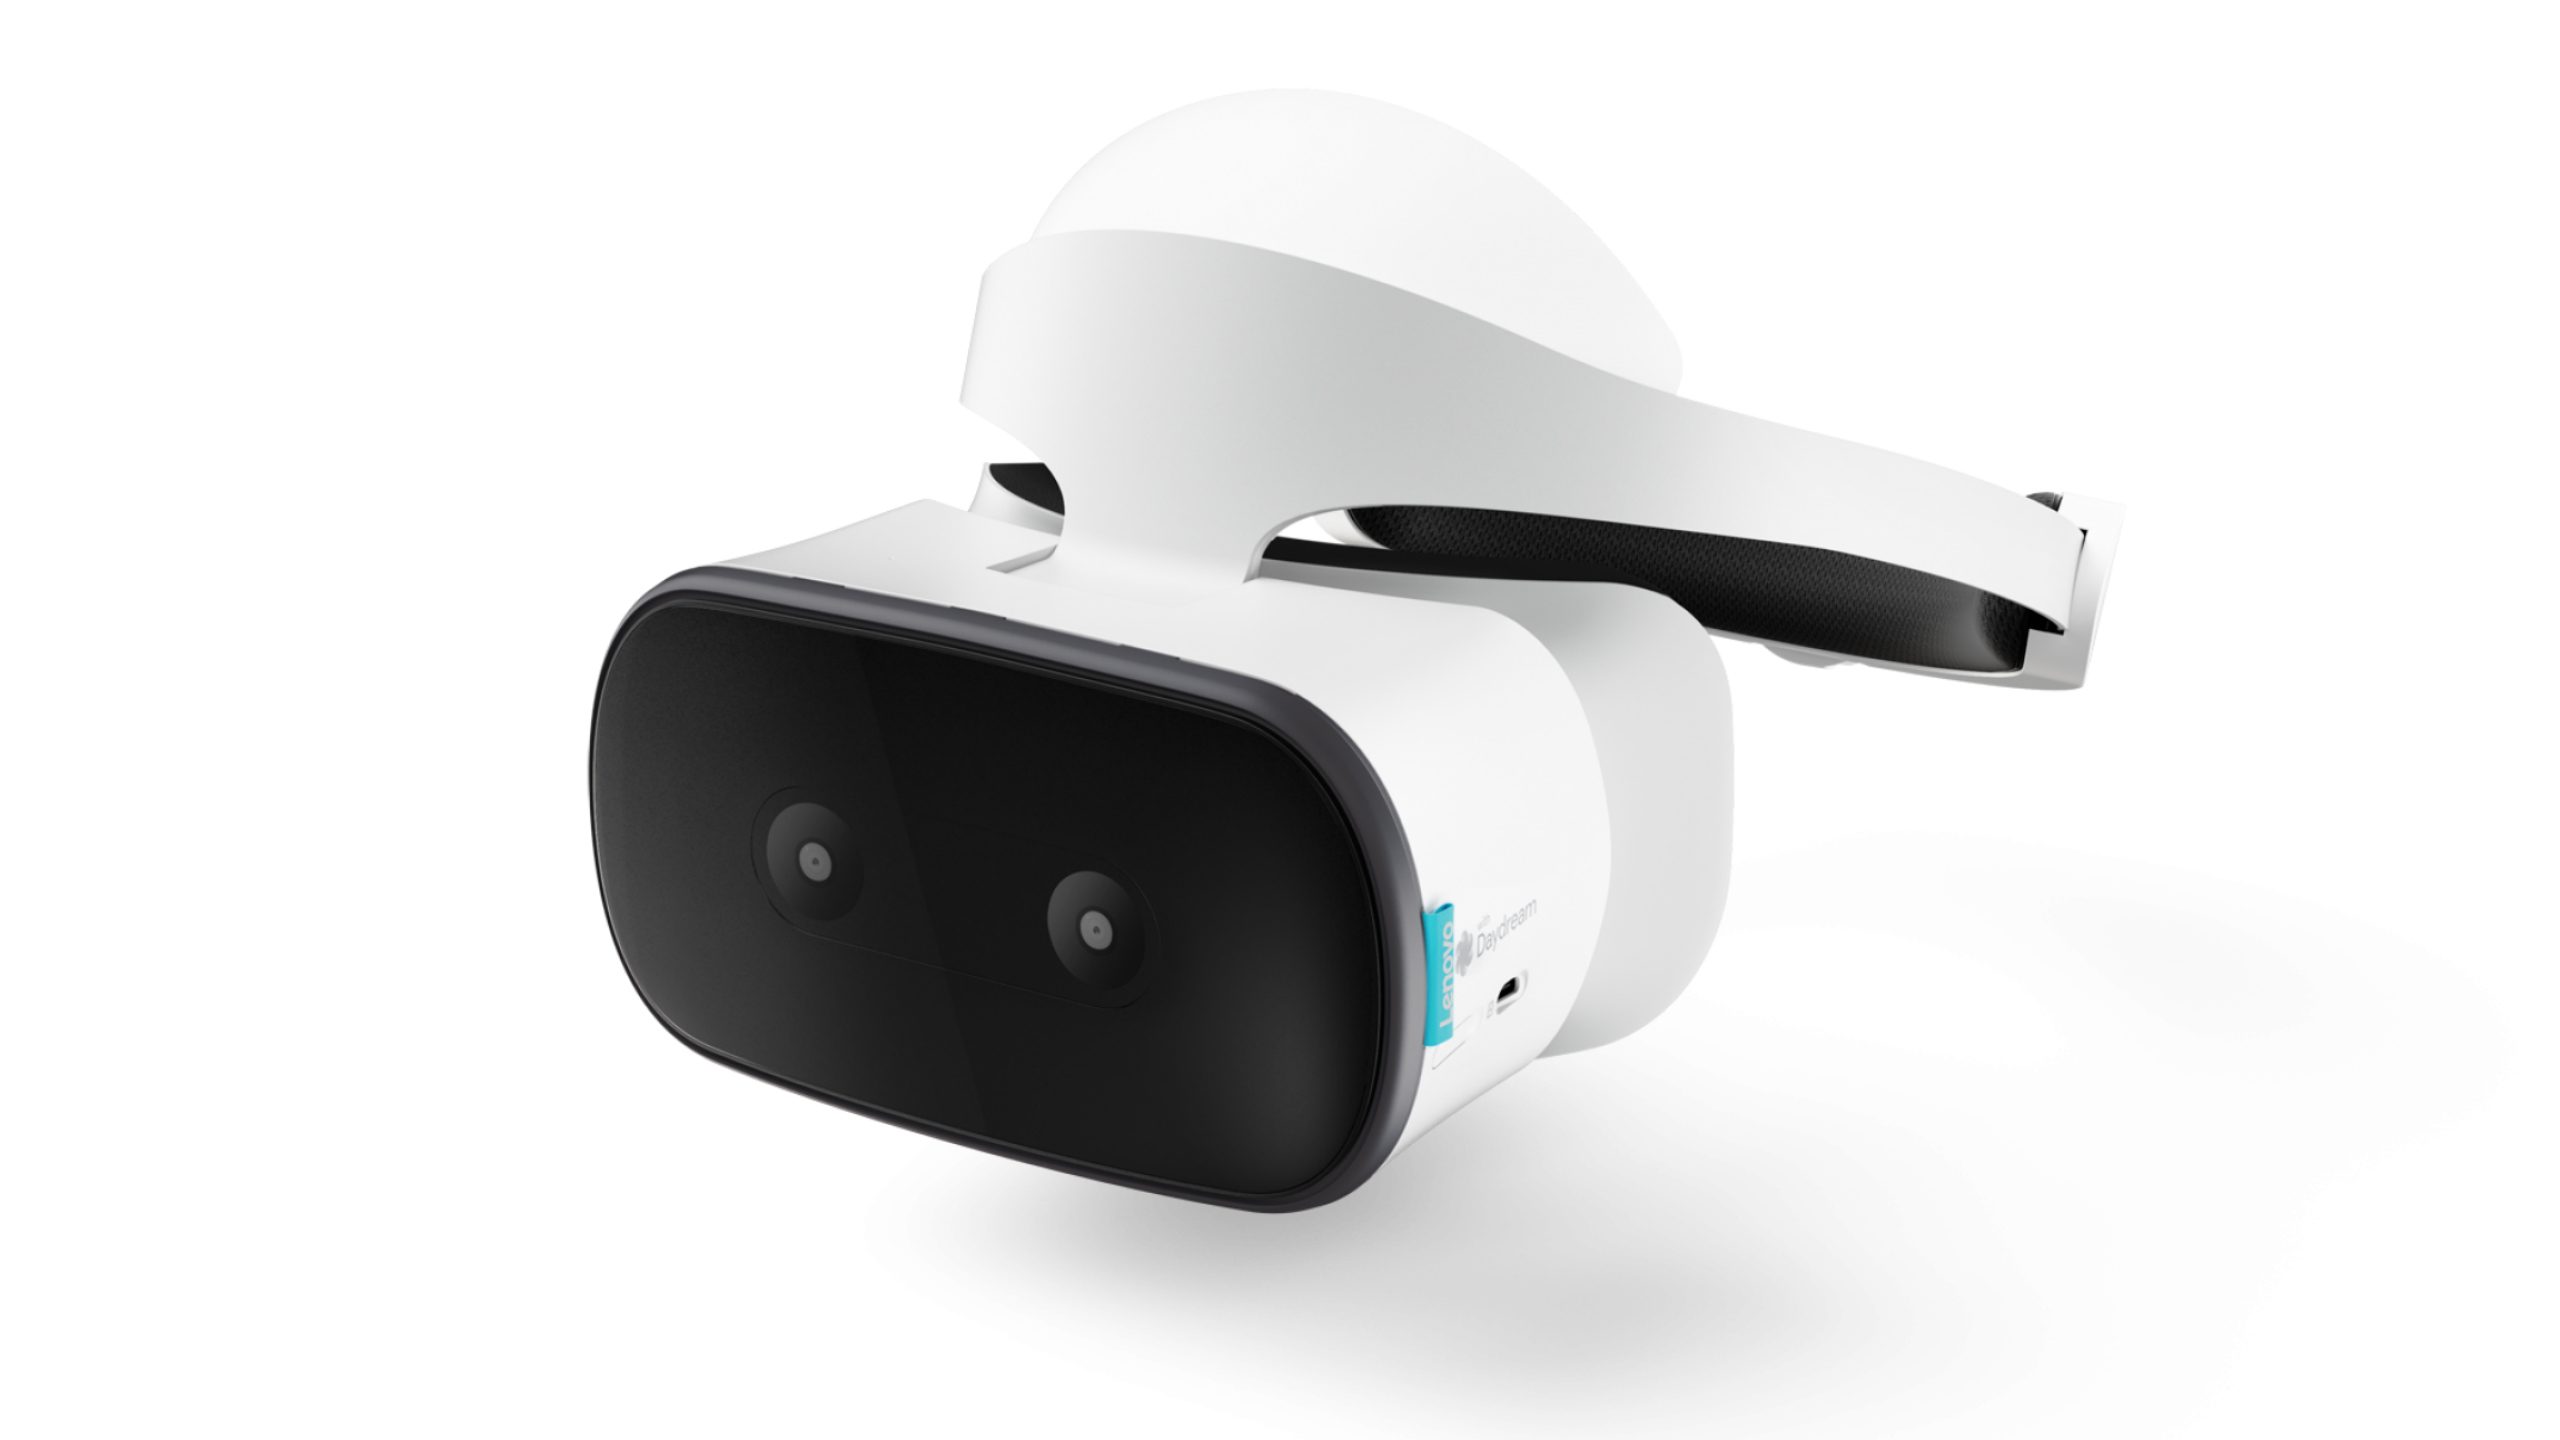 CES 2018: Lenovo Unveils Mirage Solo Daydream Standalone VR Headset